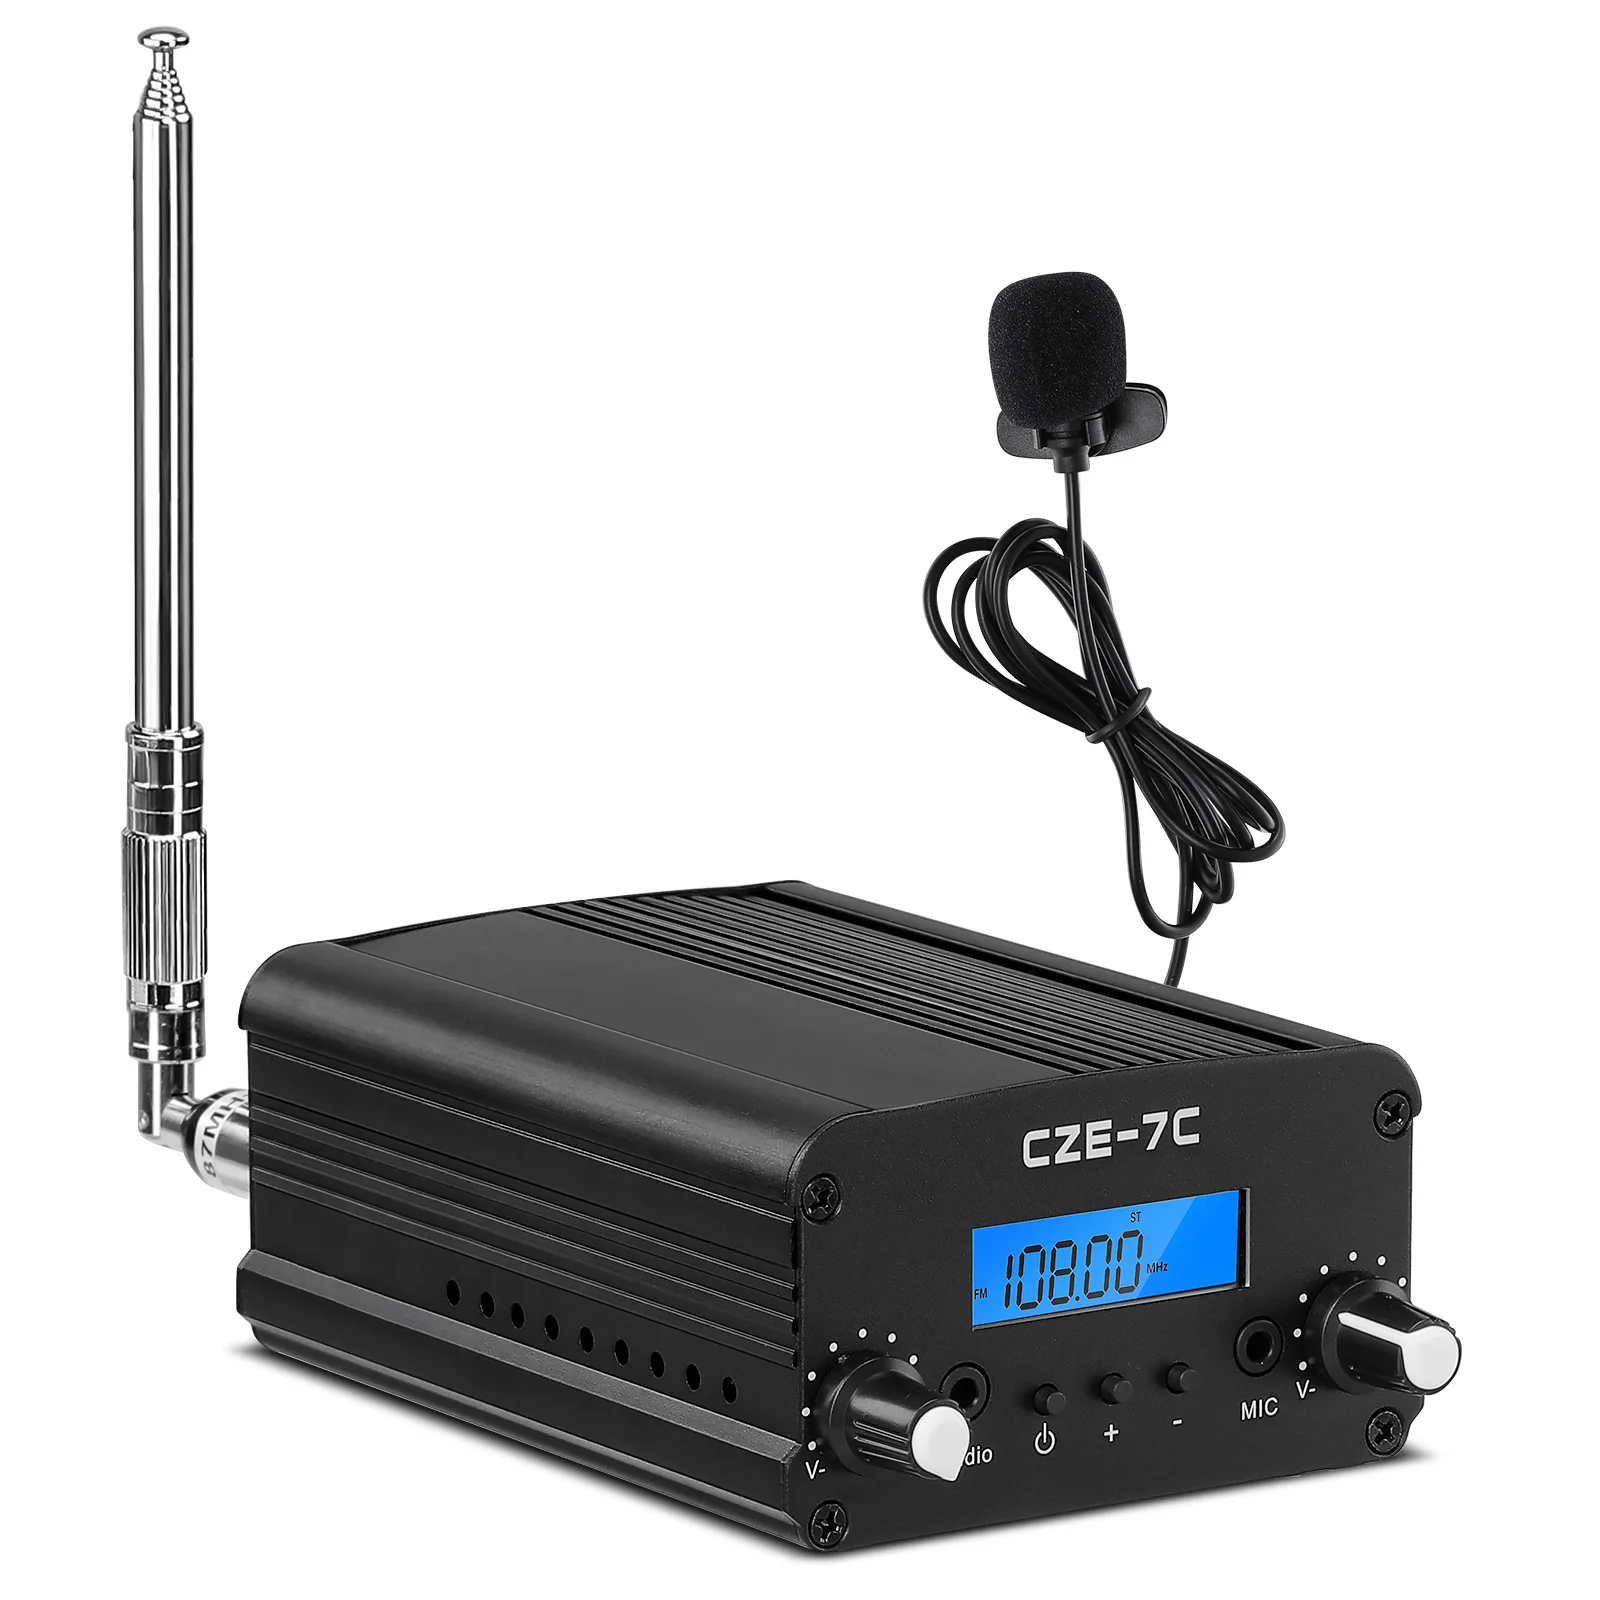 

CZE-7C 12V FM Transmitter for Church, 7W/1W MP3 Broadcast Radio Station 76~108MHz FM Transmitter With Mic for Drive in Movie